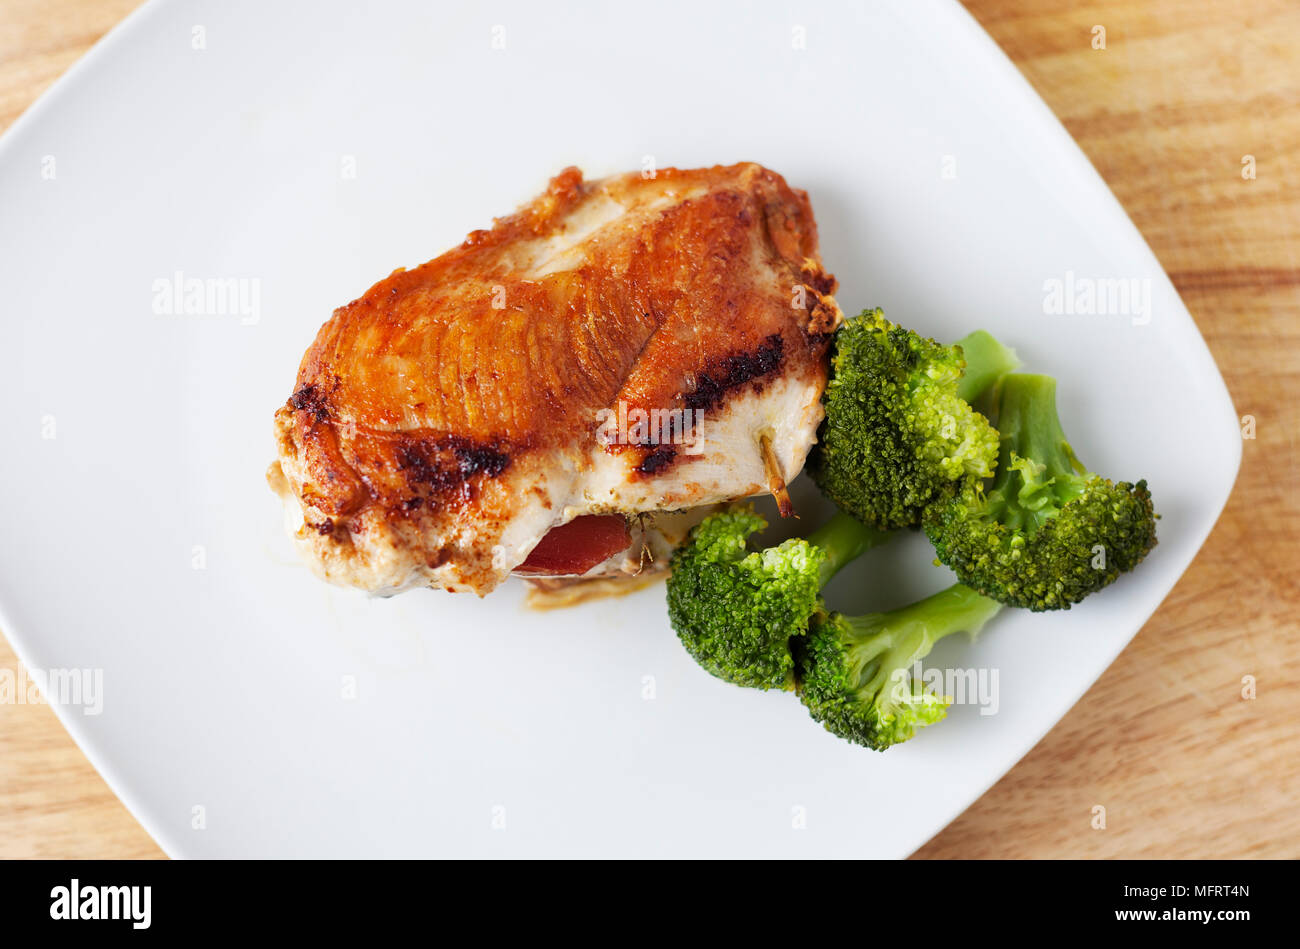 Fried chicken breast stuffed with mozzarella and Serbian ham, adding species such as oregano, smoked paprika, turmeric and pepper. Stock Photo